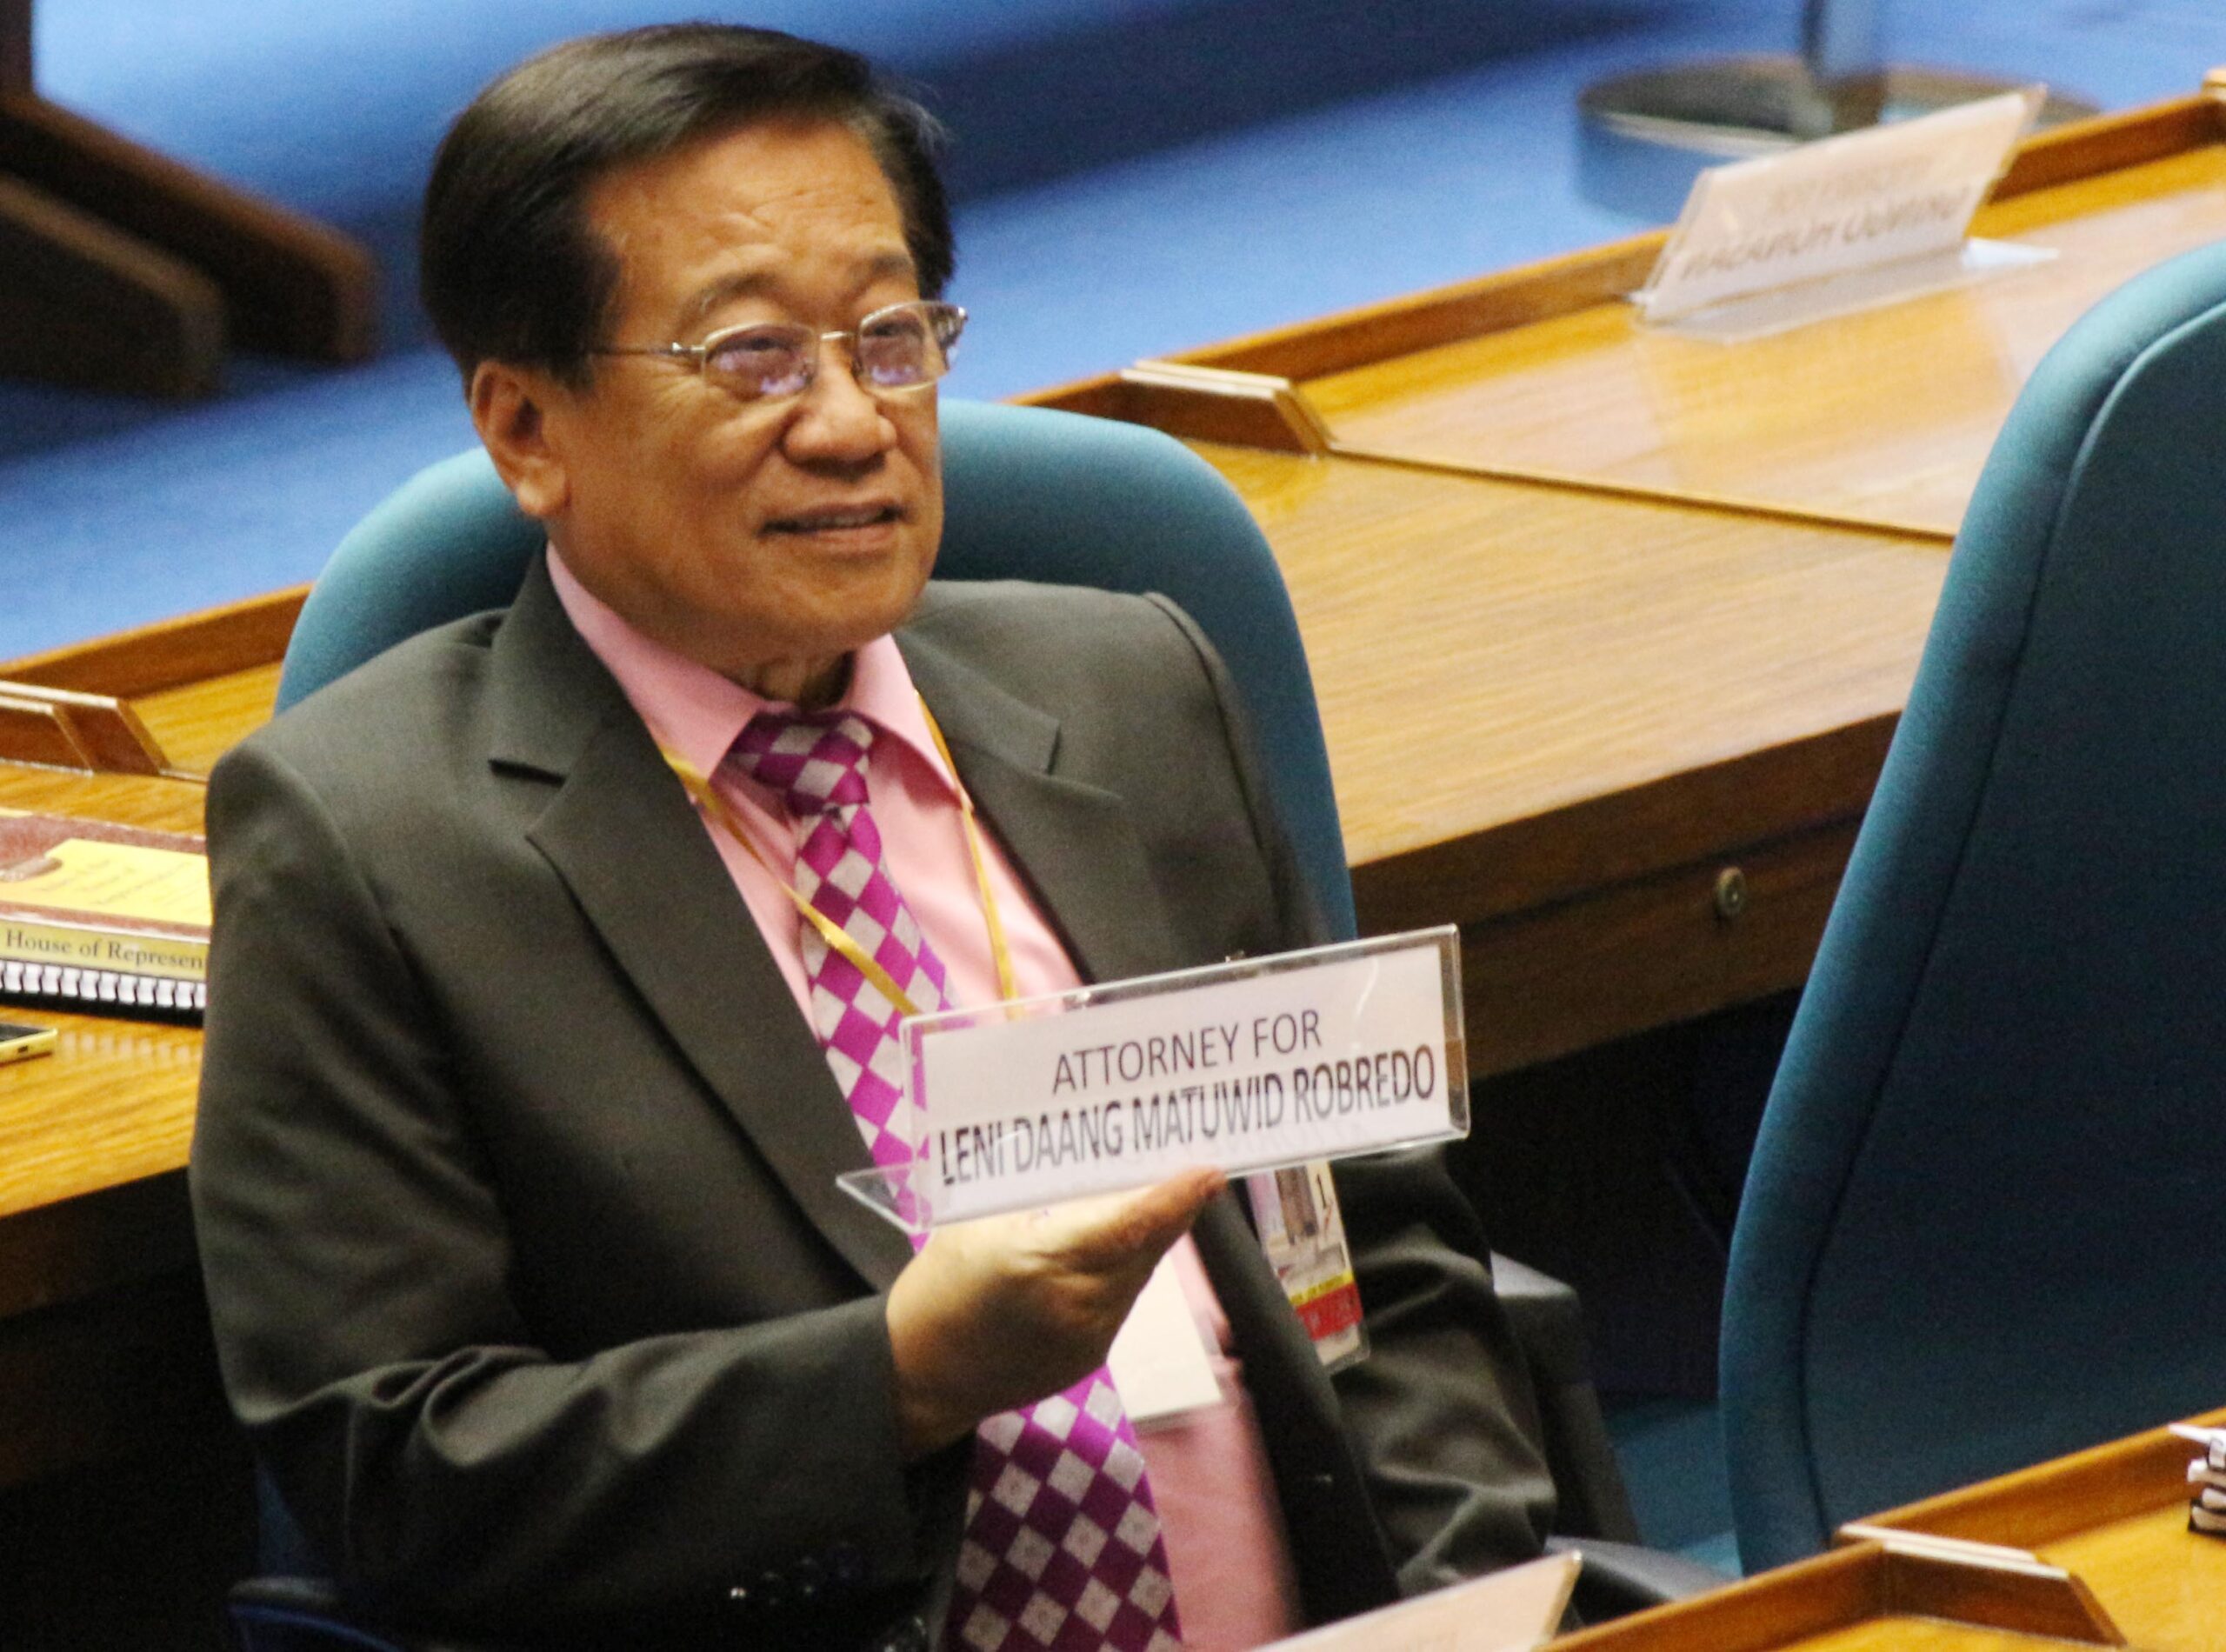 Macalintal: Under voting doesn’t mean electoral fraud